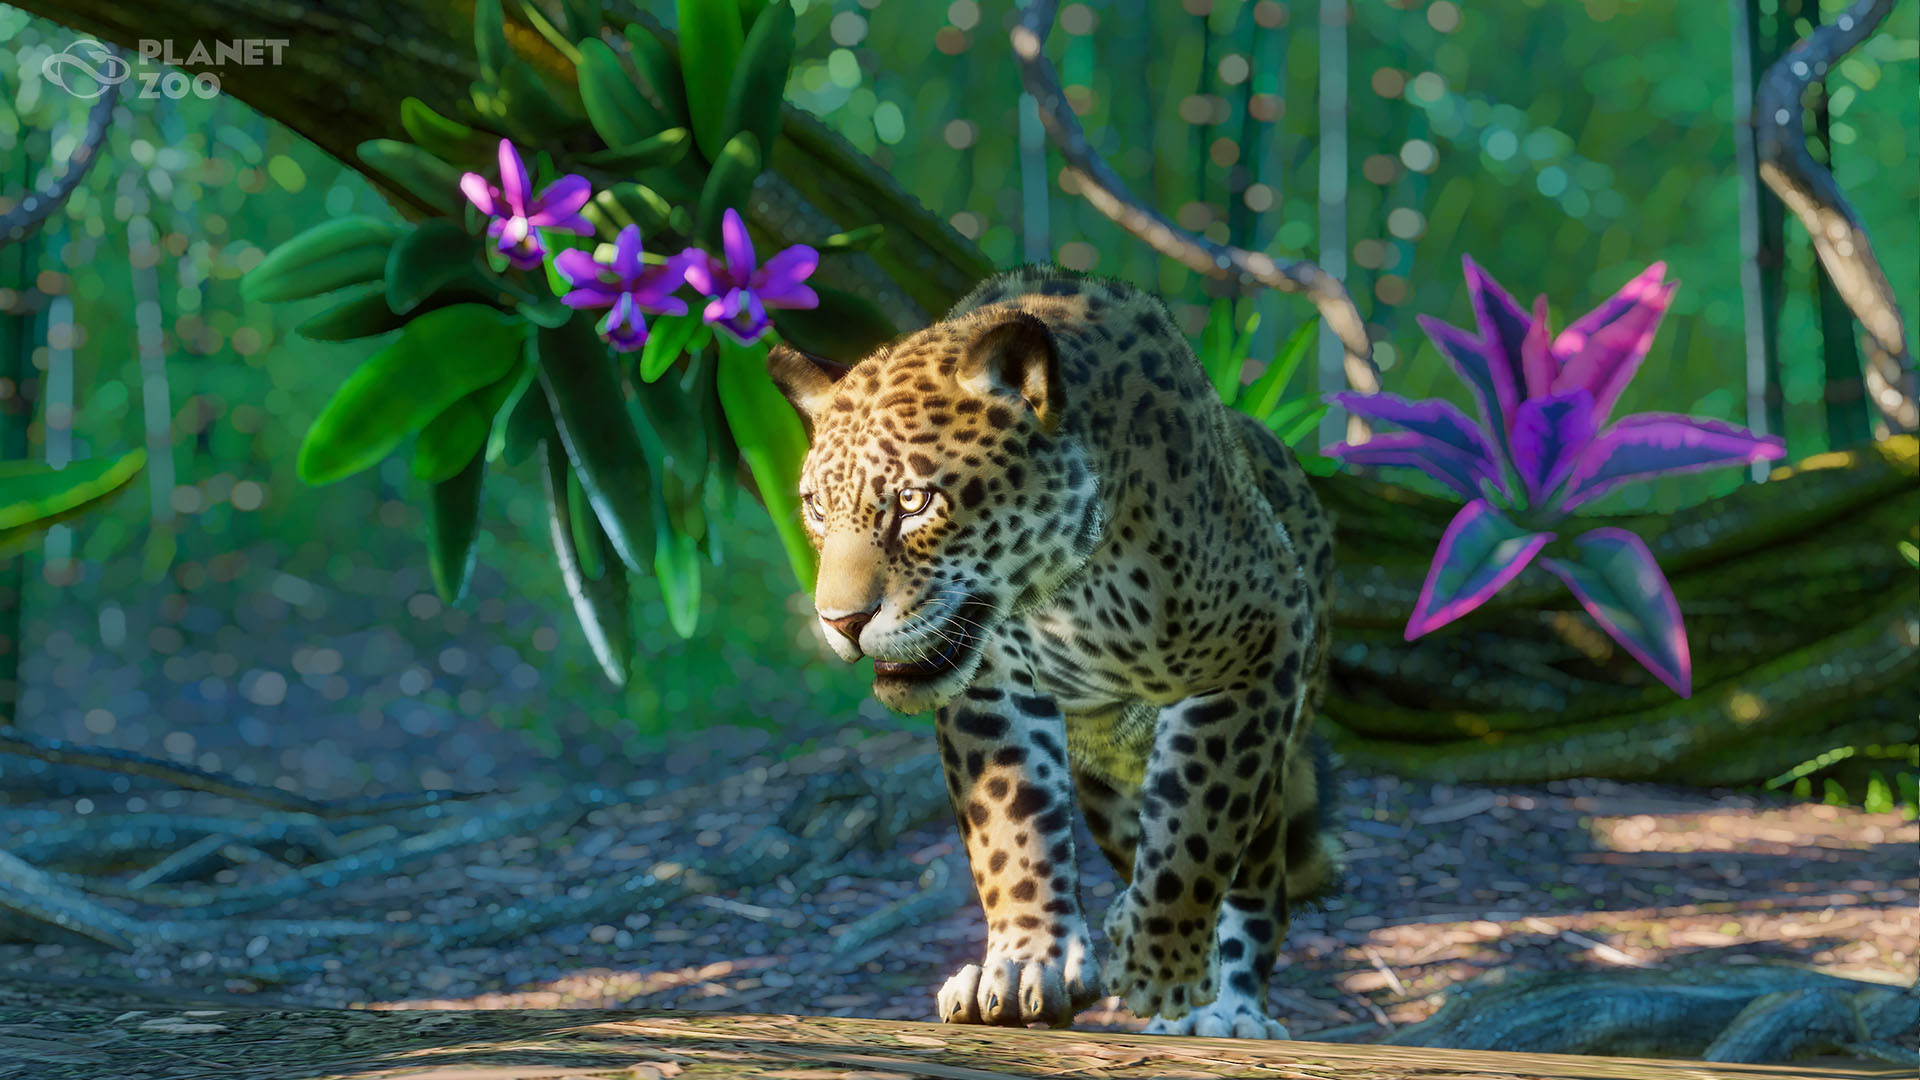 Planet Zoo: South America Pack DLC Announced, Releases April 7